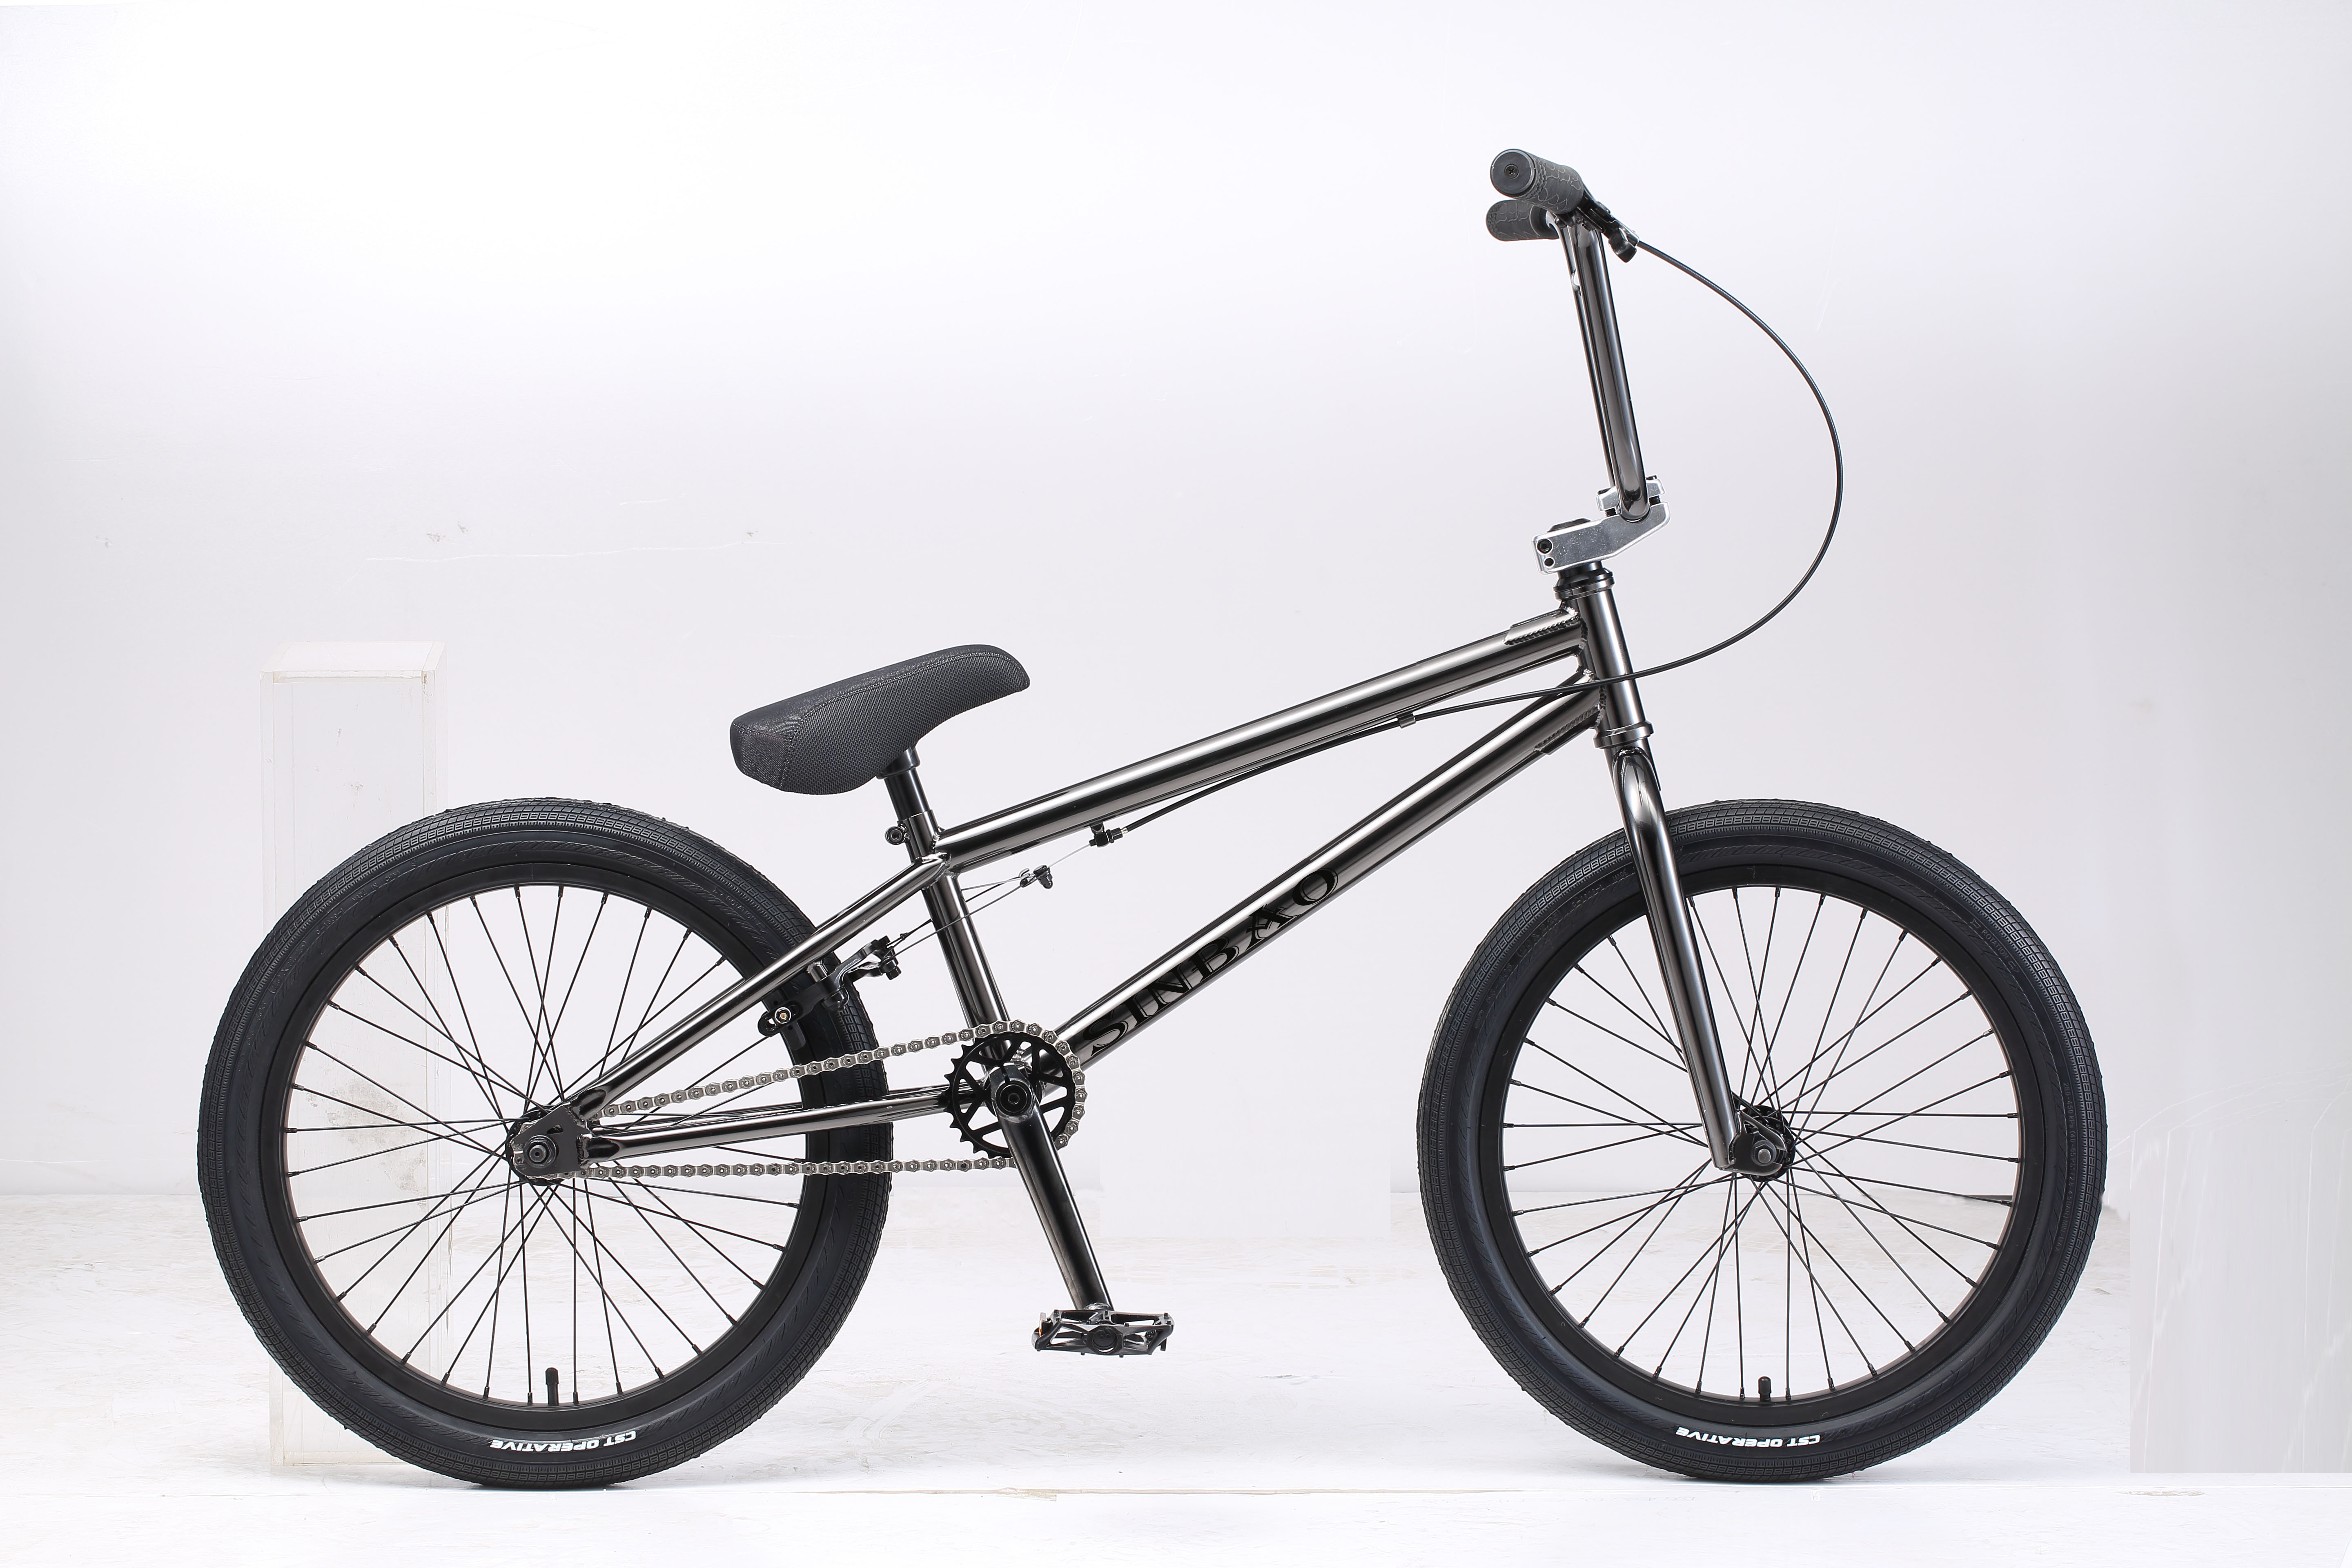 Cr-mo BMX with CHROME COLORS Featured Image